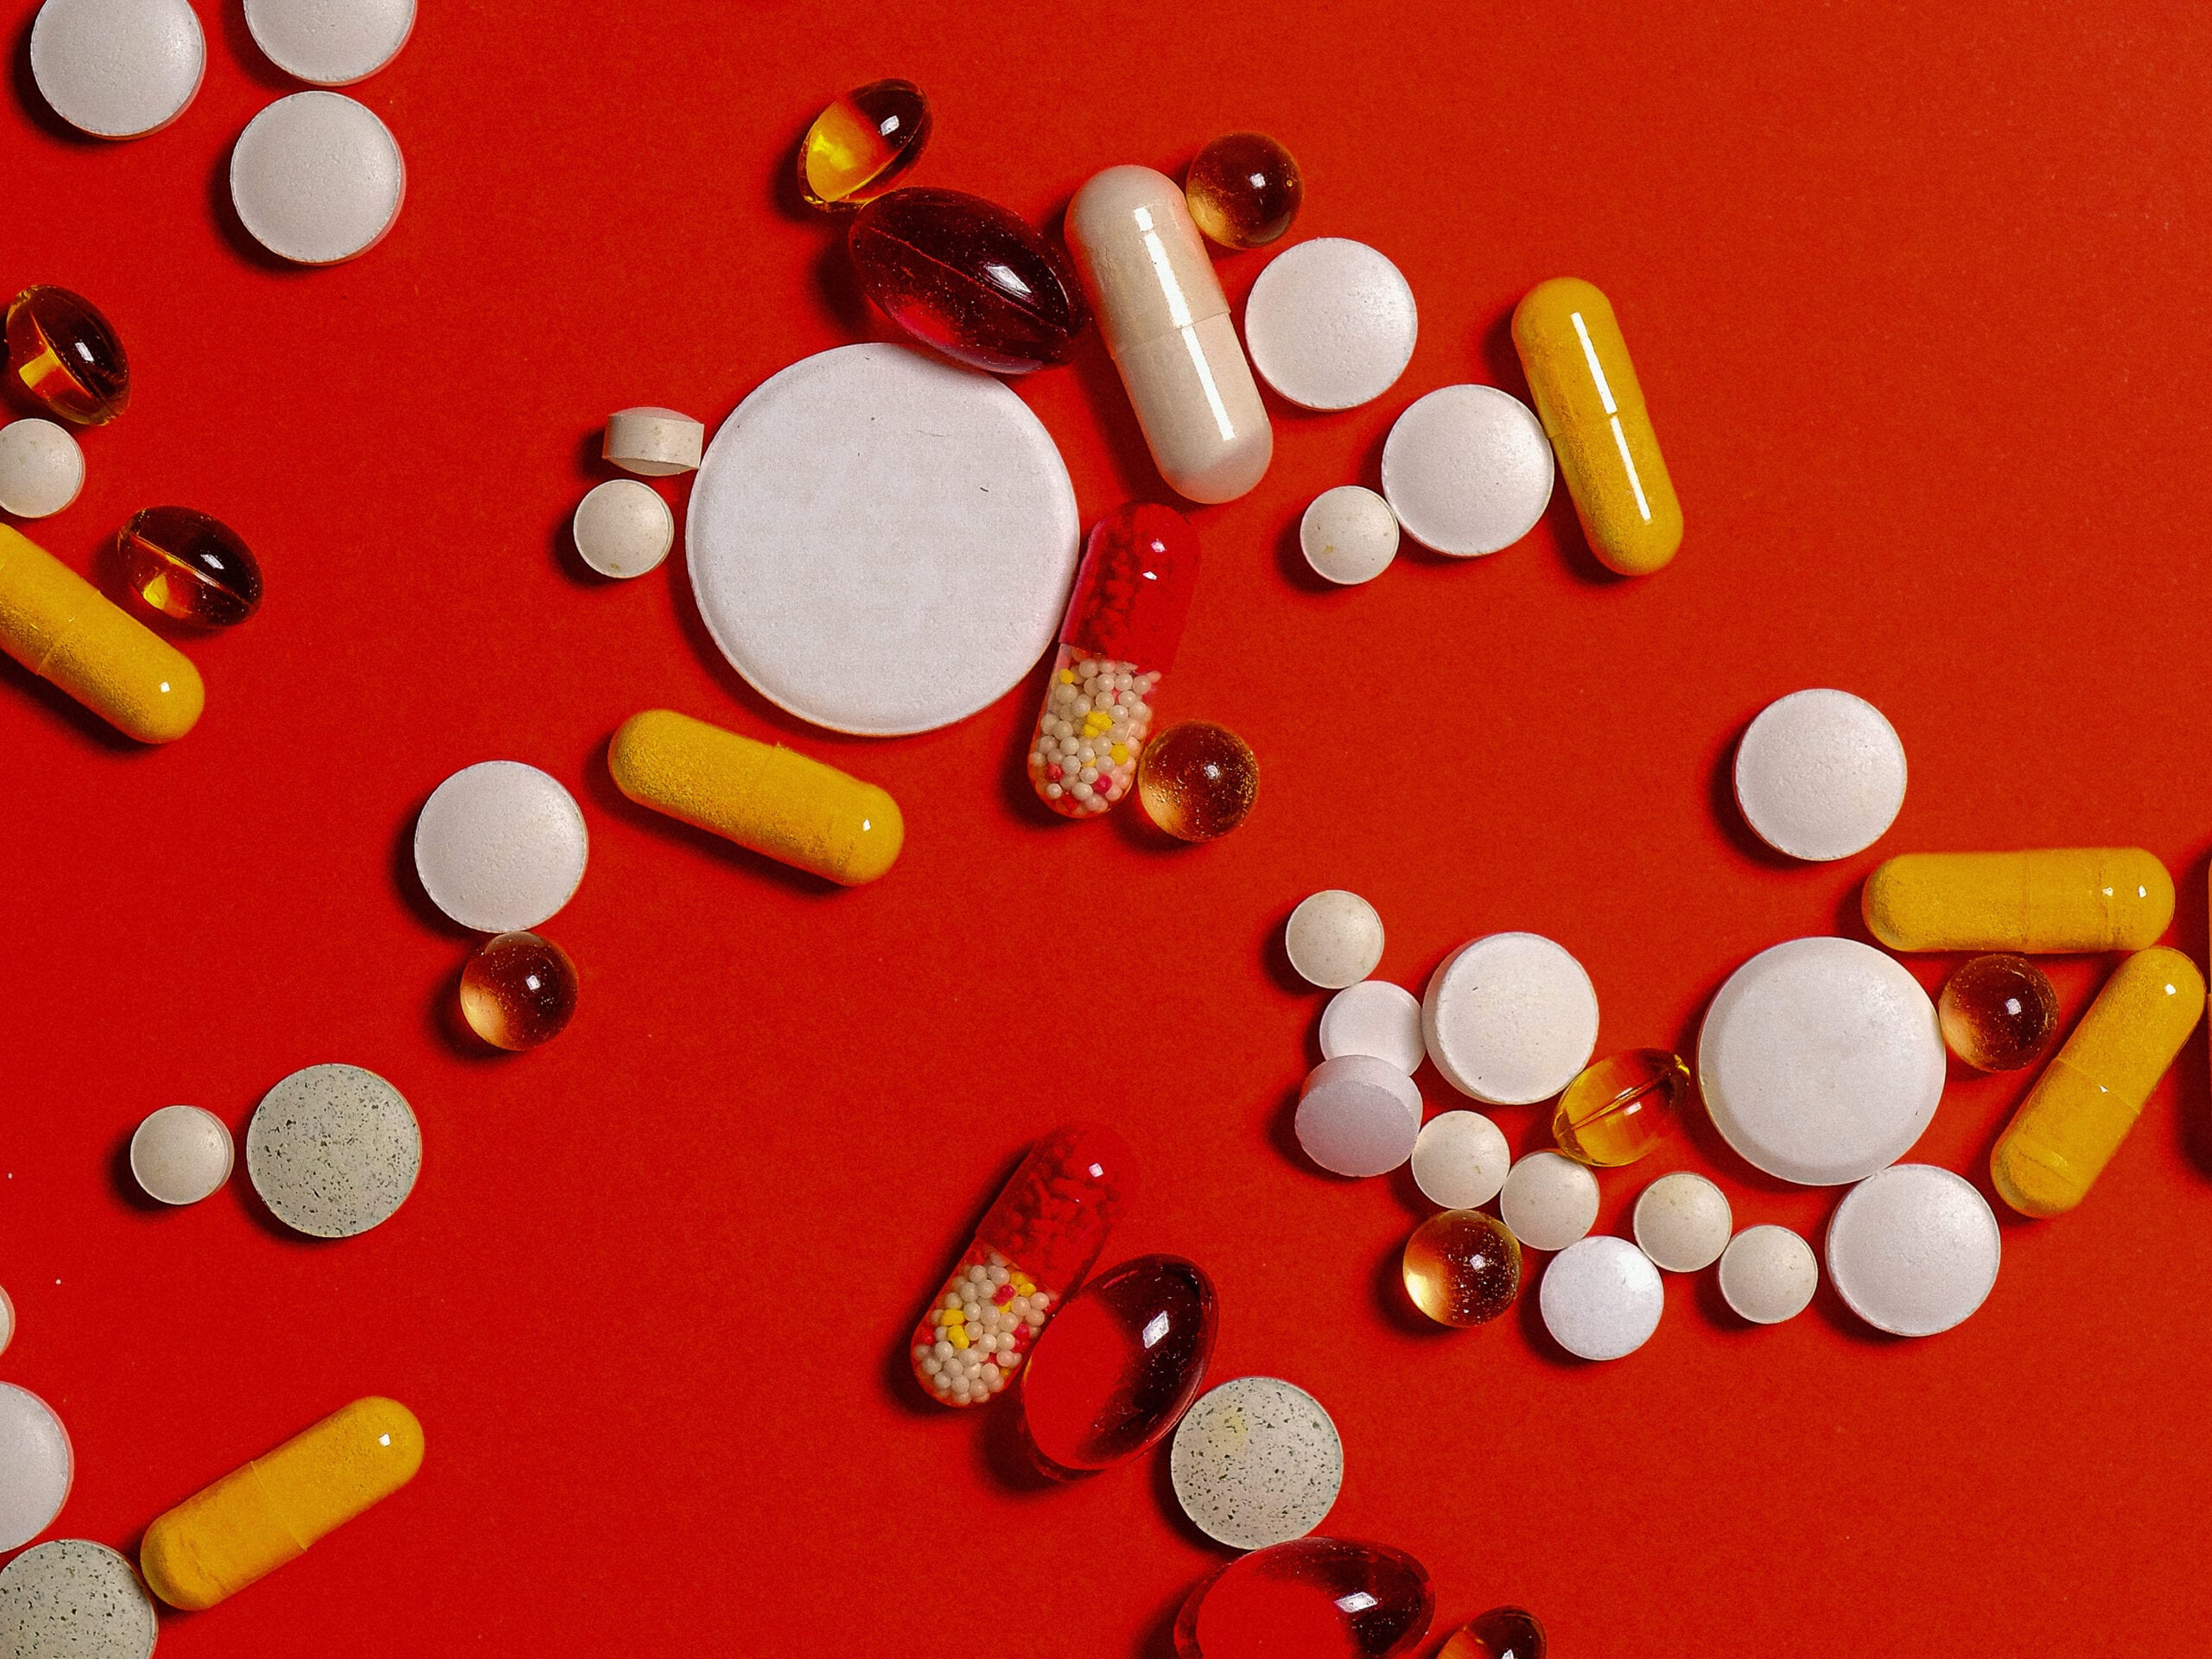 A variety of medicines. RDM has extensive experience in healthcare law and medical and pharmaceutical litigation.